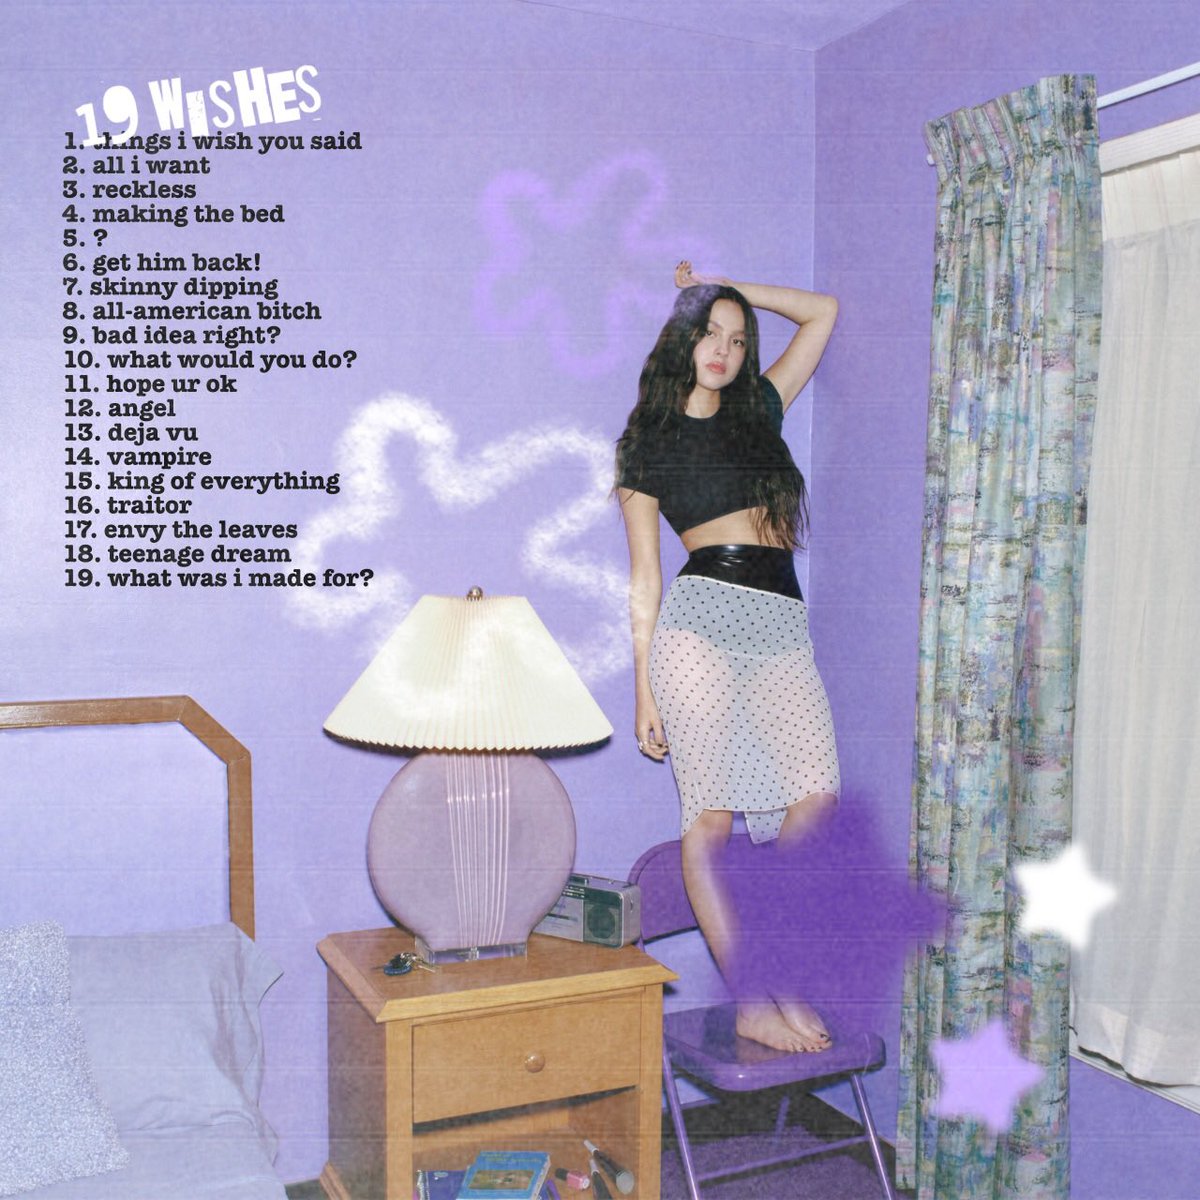 “19 Wishes” — out now! 🎂
#19Wishes #AlbumsBld